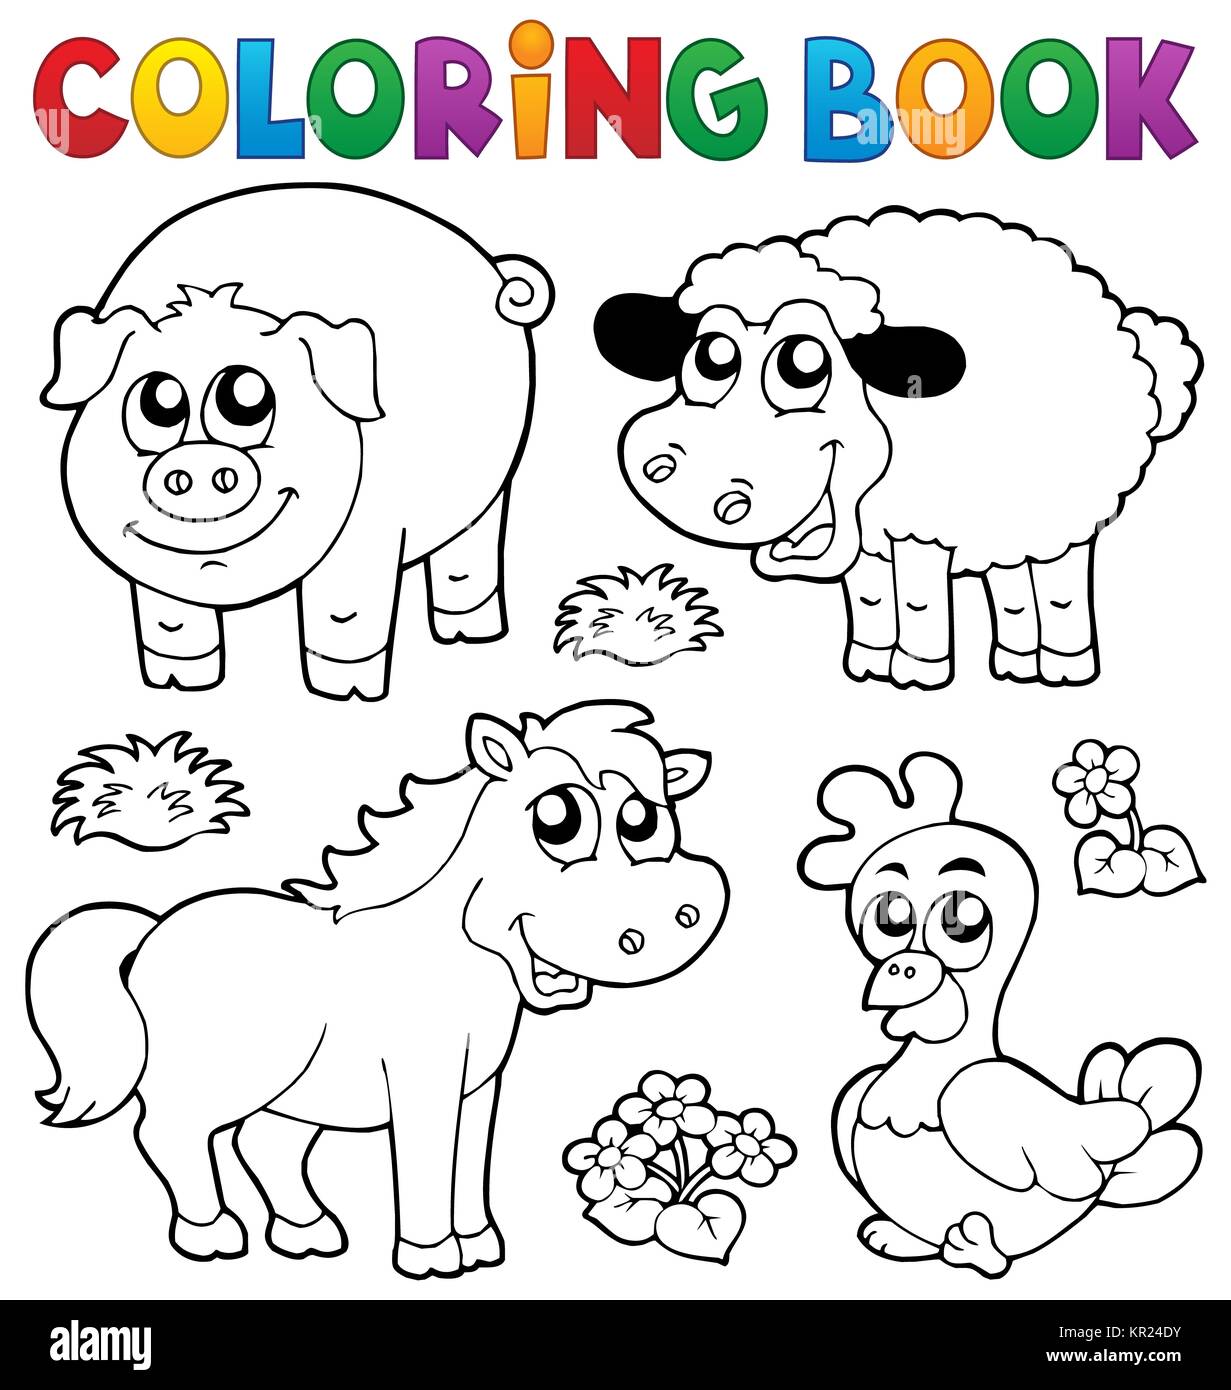 Coloring book with farm animals 5 Stock Photo - Alamy